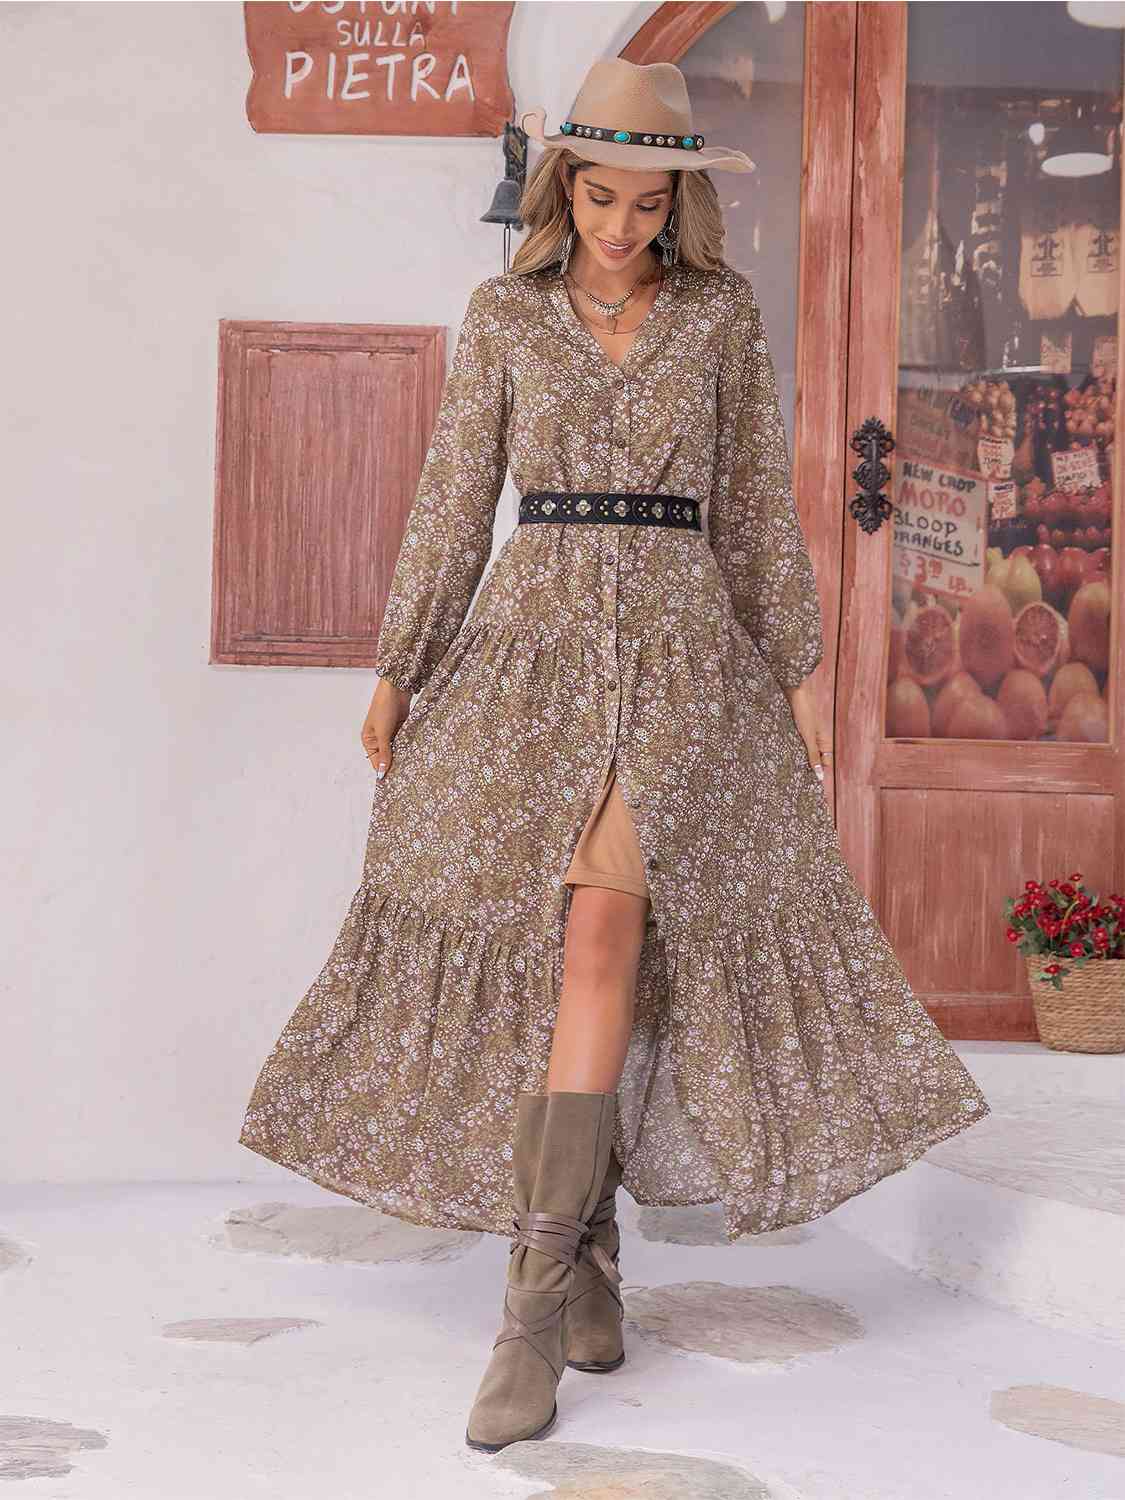 Floral Button Up V-Neck Tiered Dress - Bellisima Clothing Collective